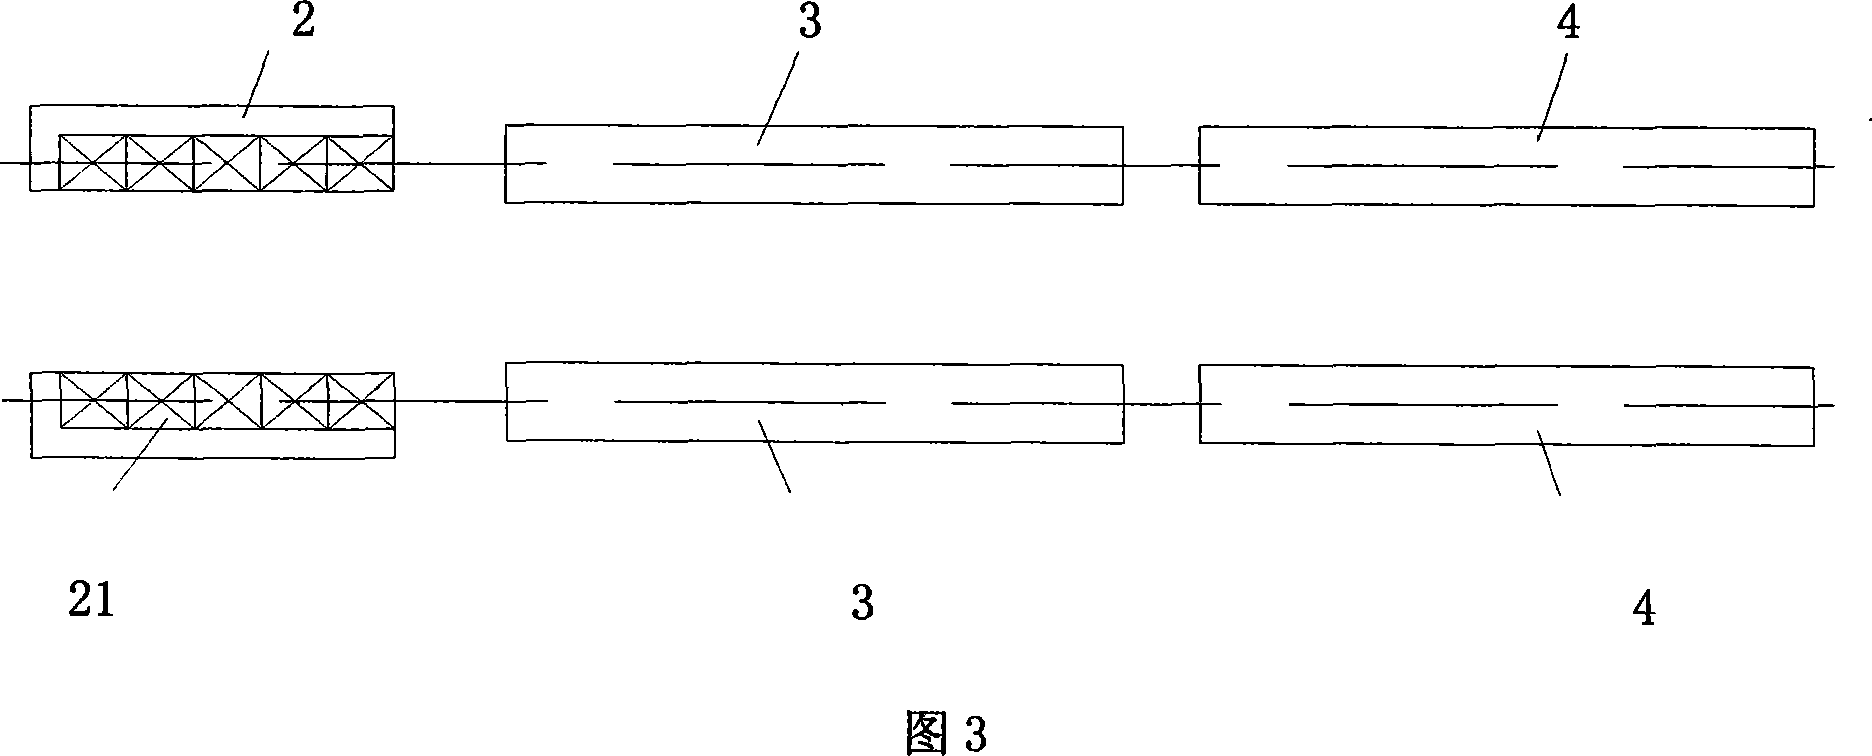 Method for skipping biomass energy power plant system